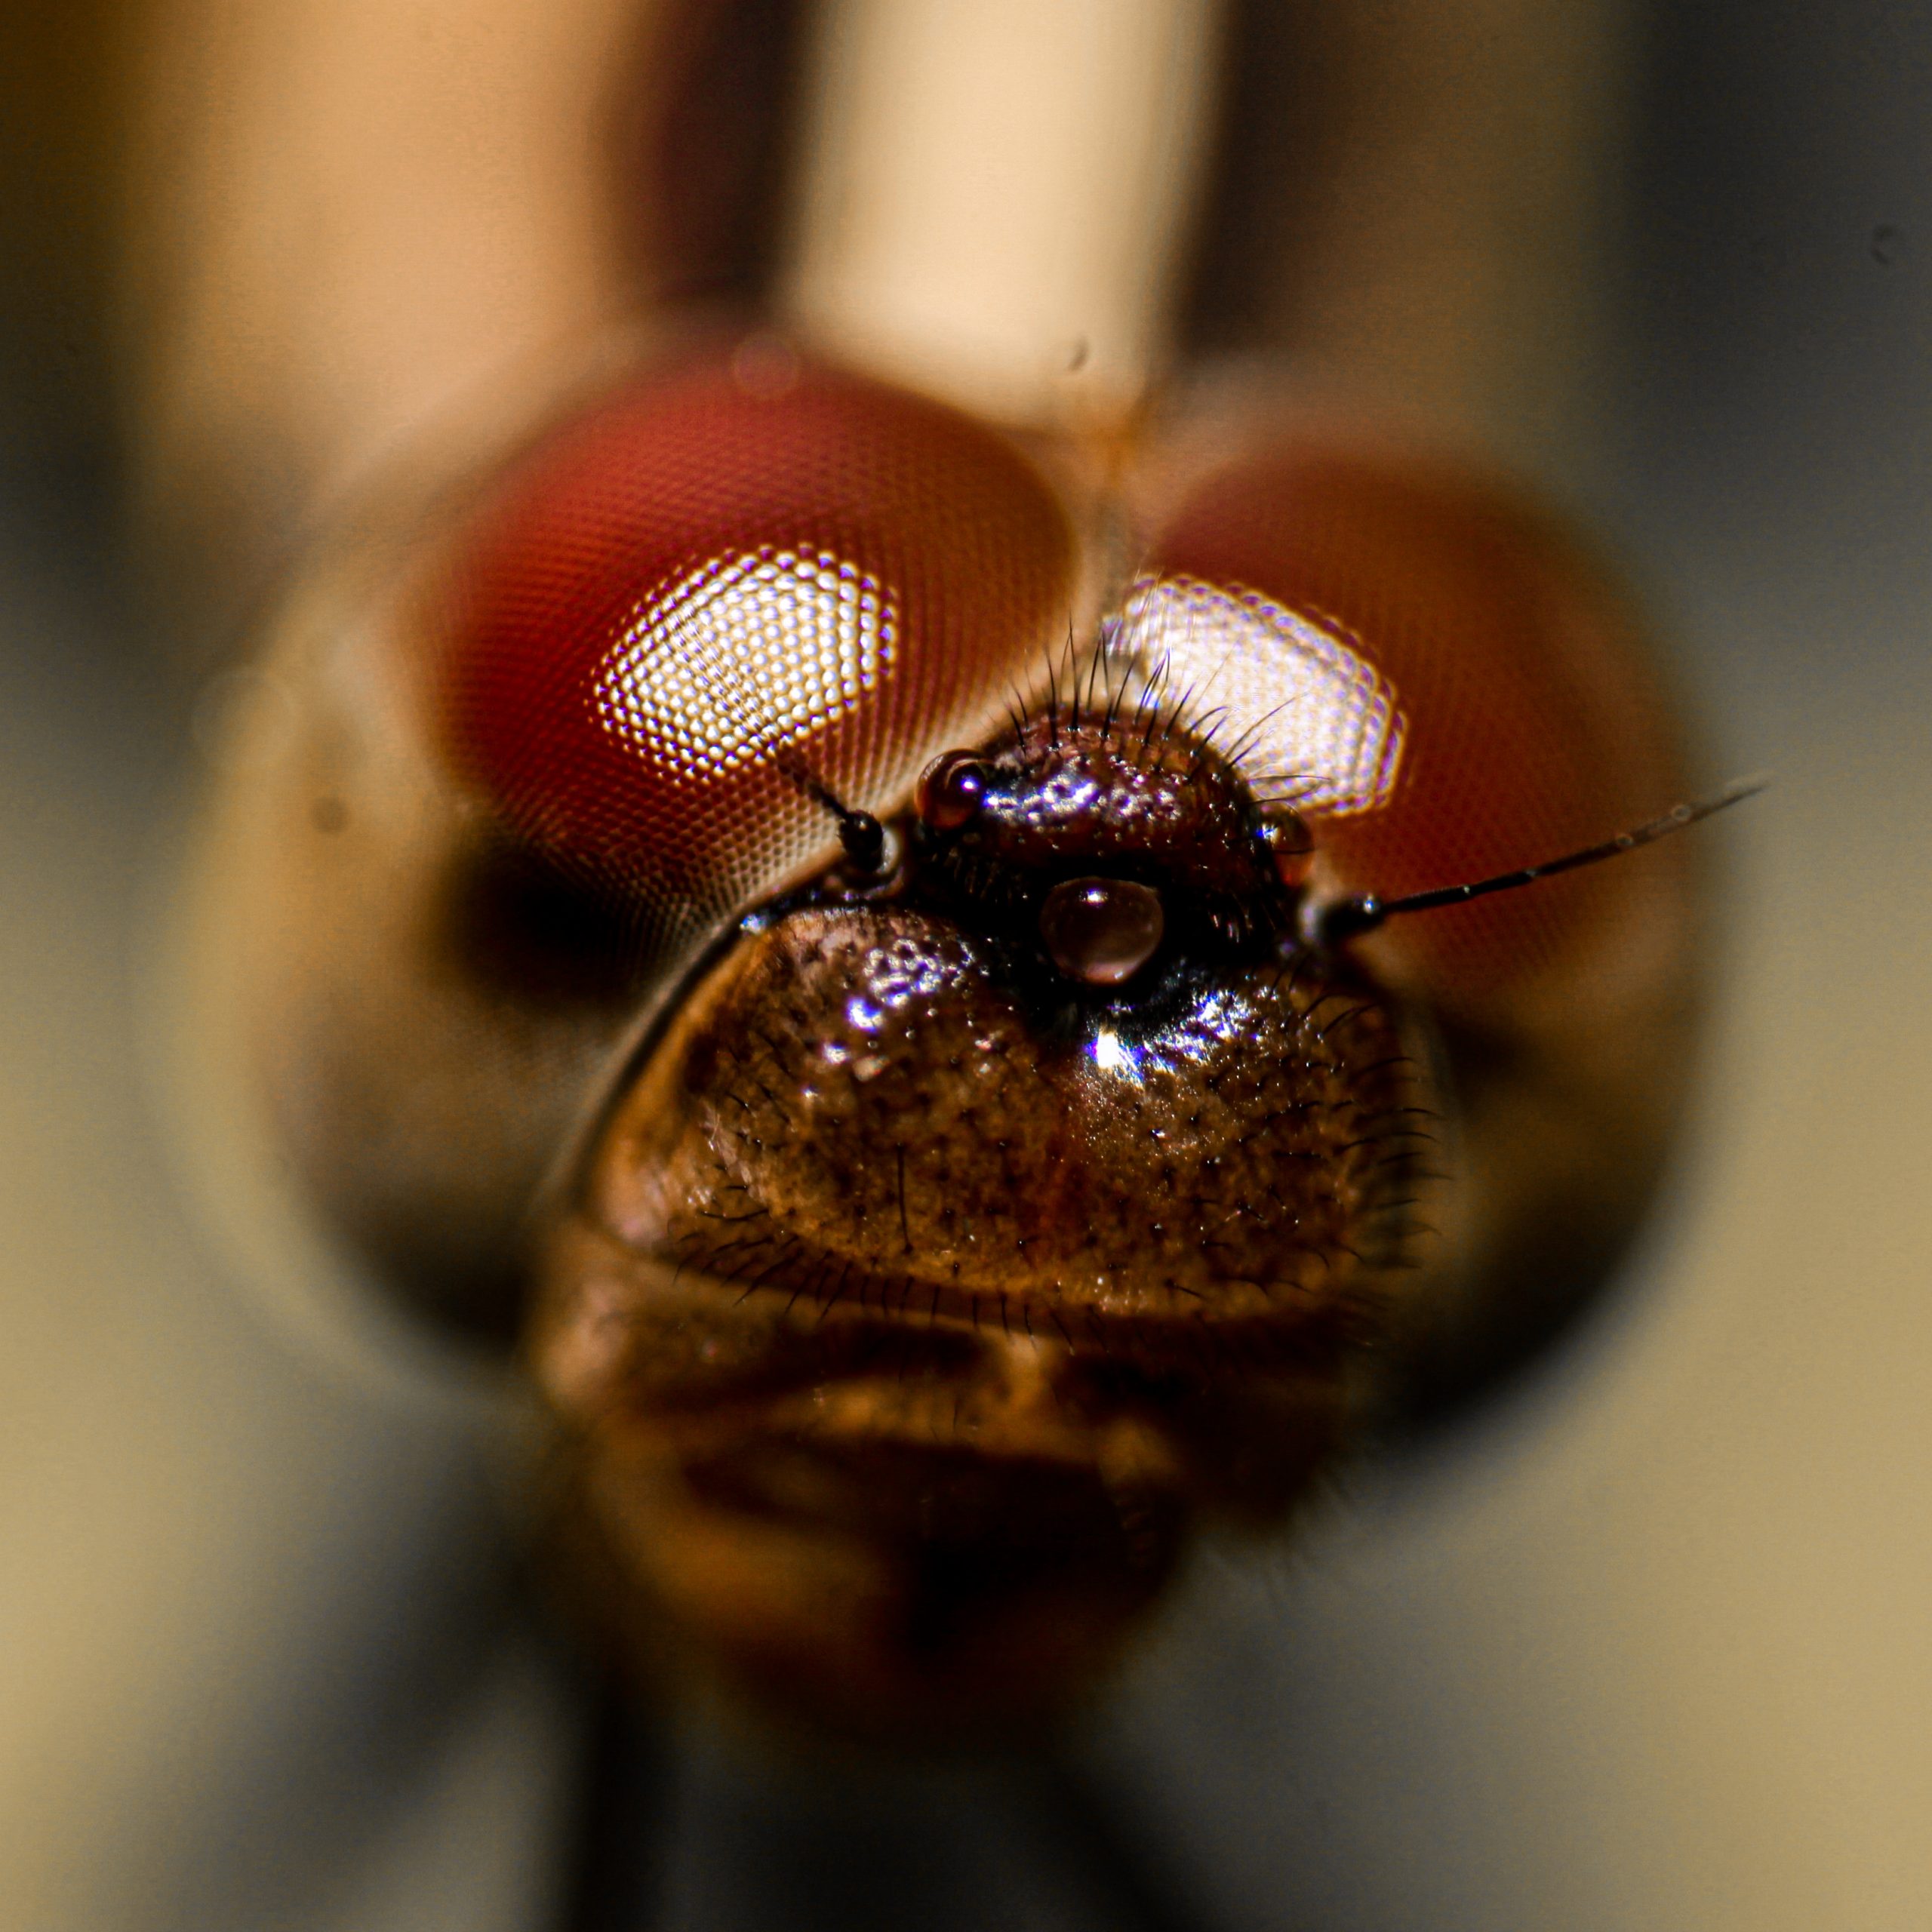 Closer look of an insect's head